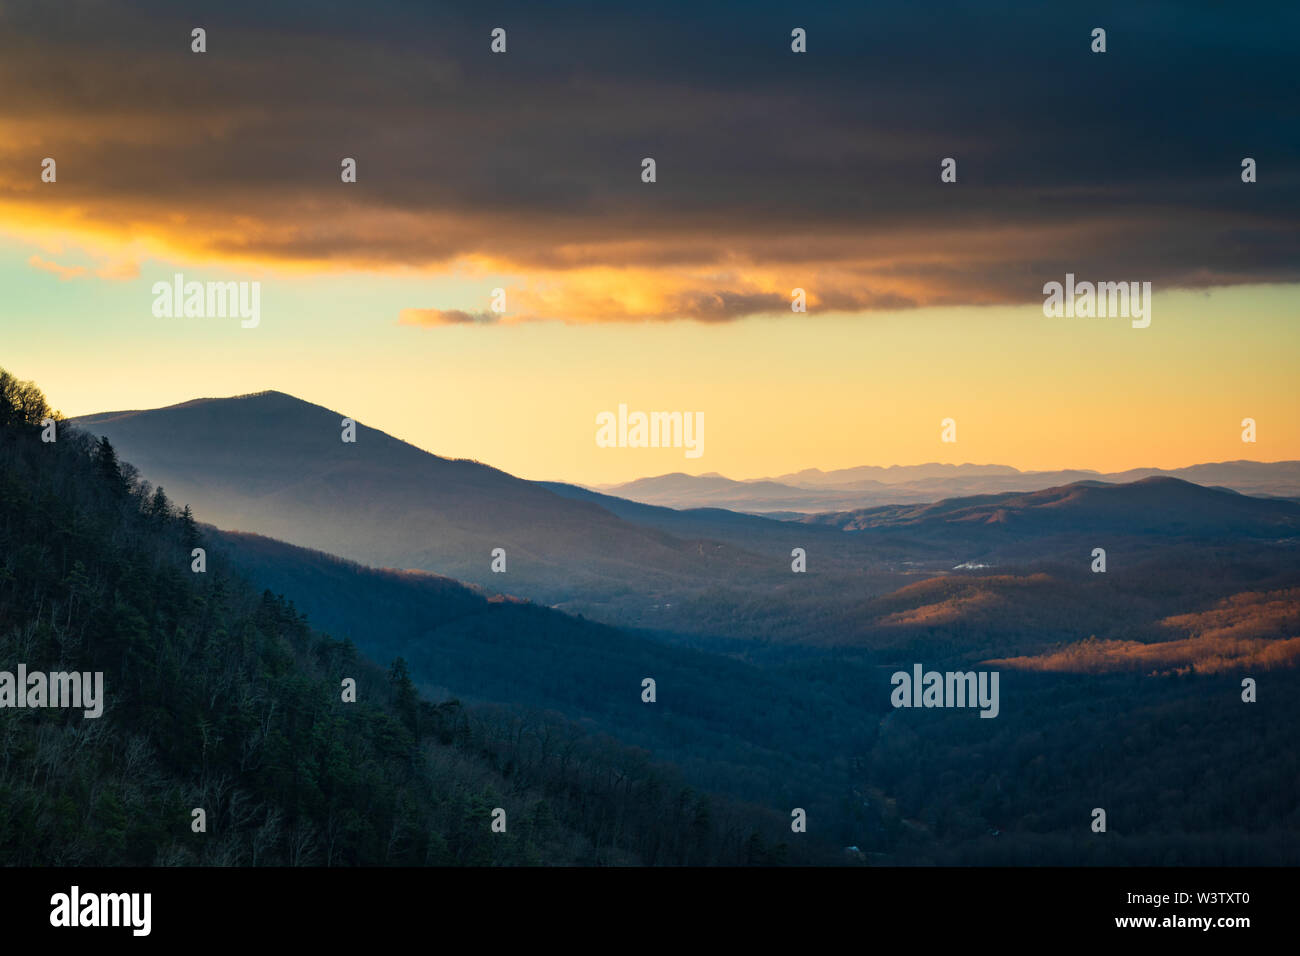 First light reaches North Cove valley, North Carolina, USA. On the left are Honeycutt Ridge and Linville Mountain. Stock Photo